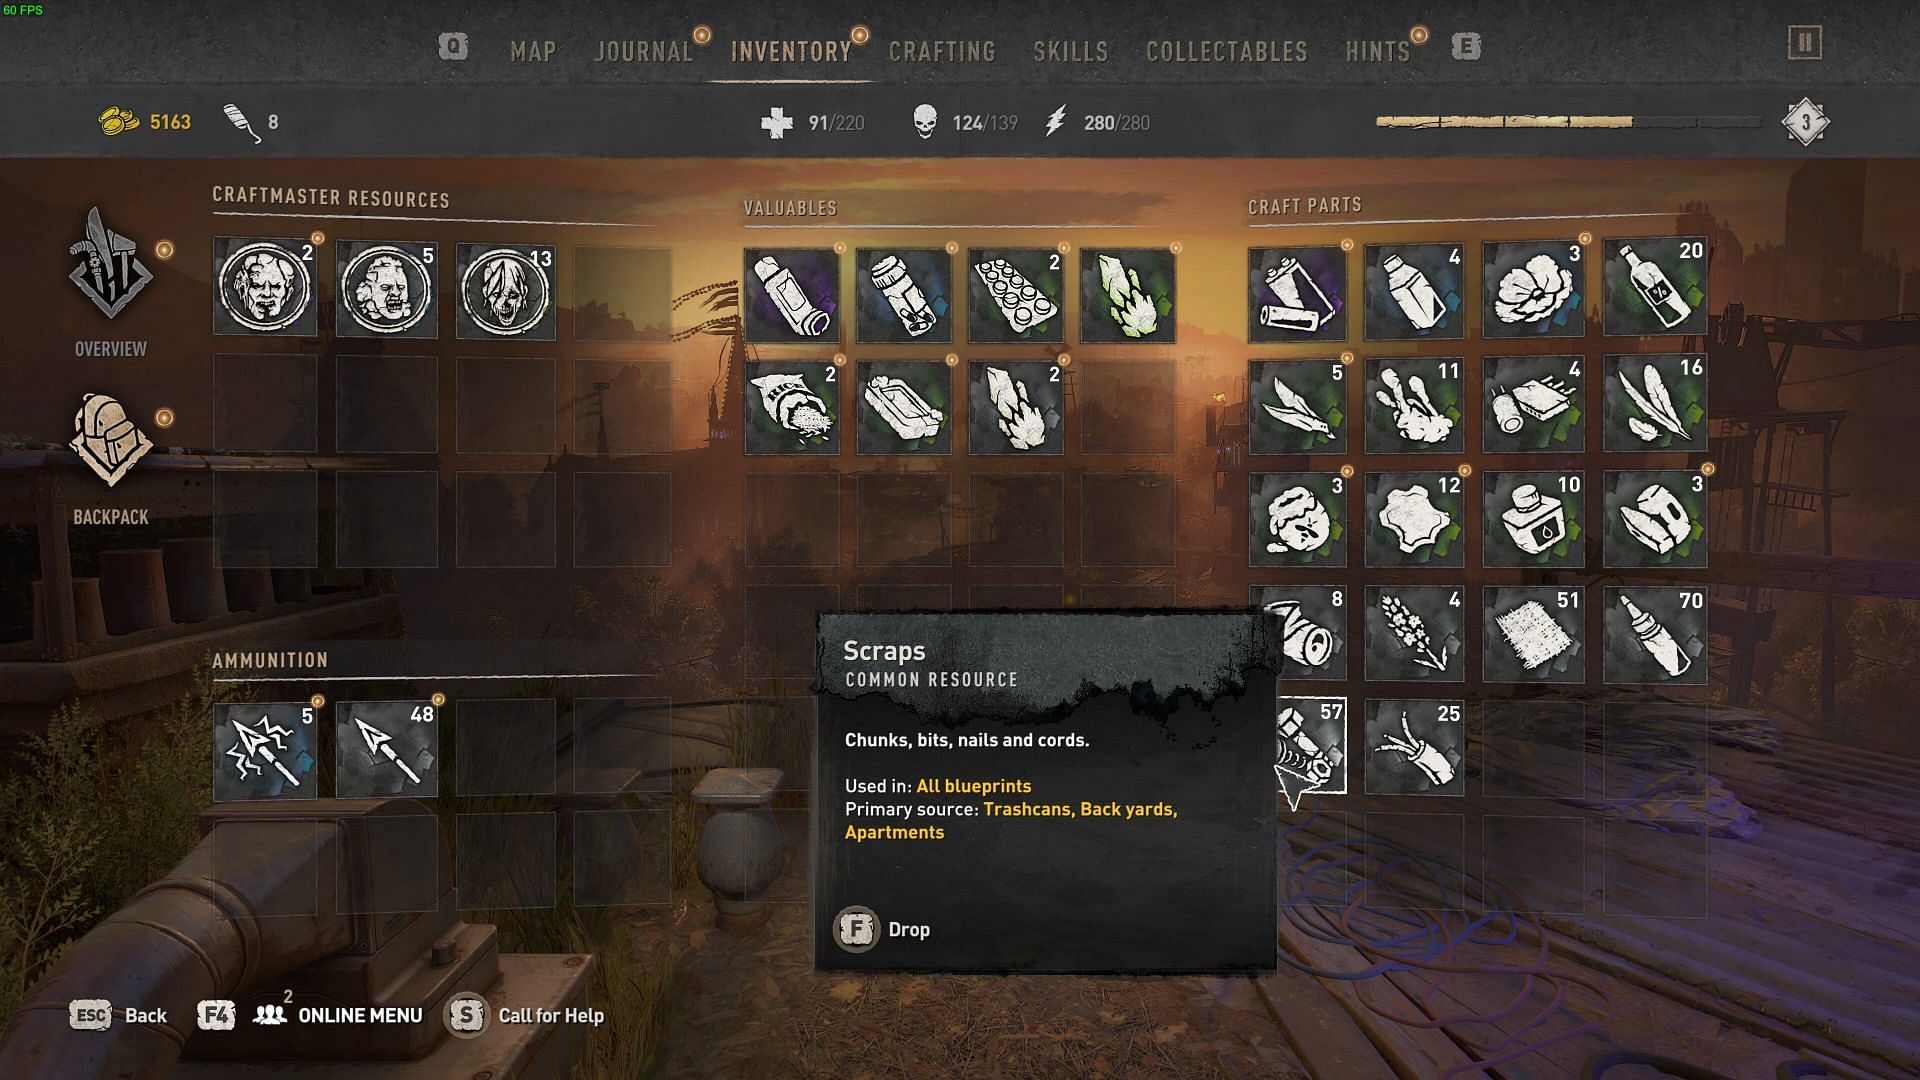 Scraps are very useful for crafting in Dying Light 2 (Image via Techland)